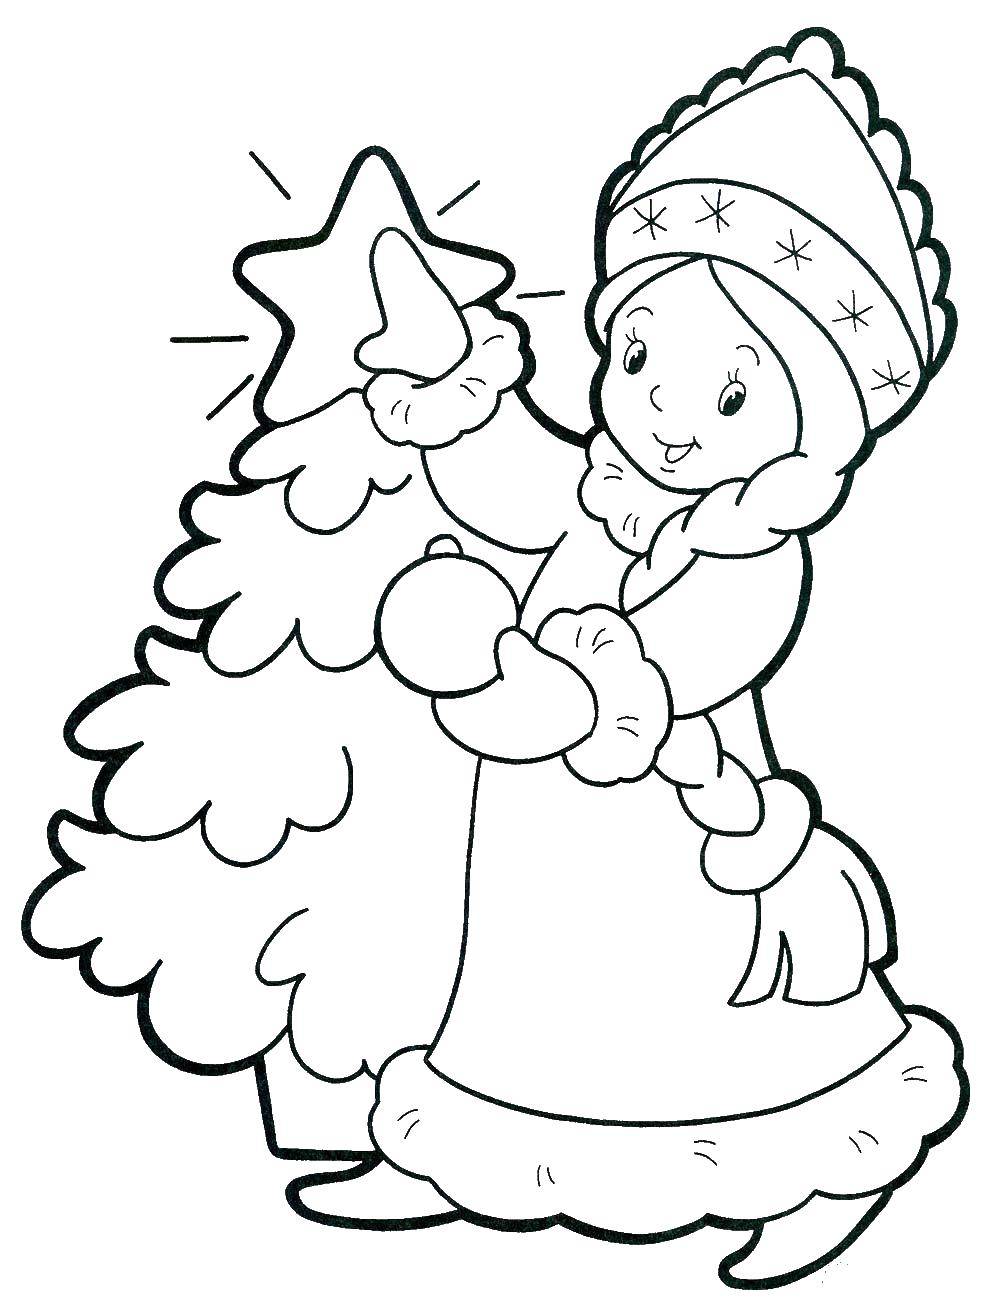 Coloring Maiden. Category maiden. Tags:  Snow maiden, winter, New Year.